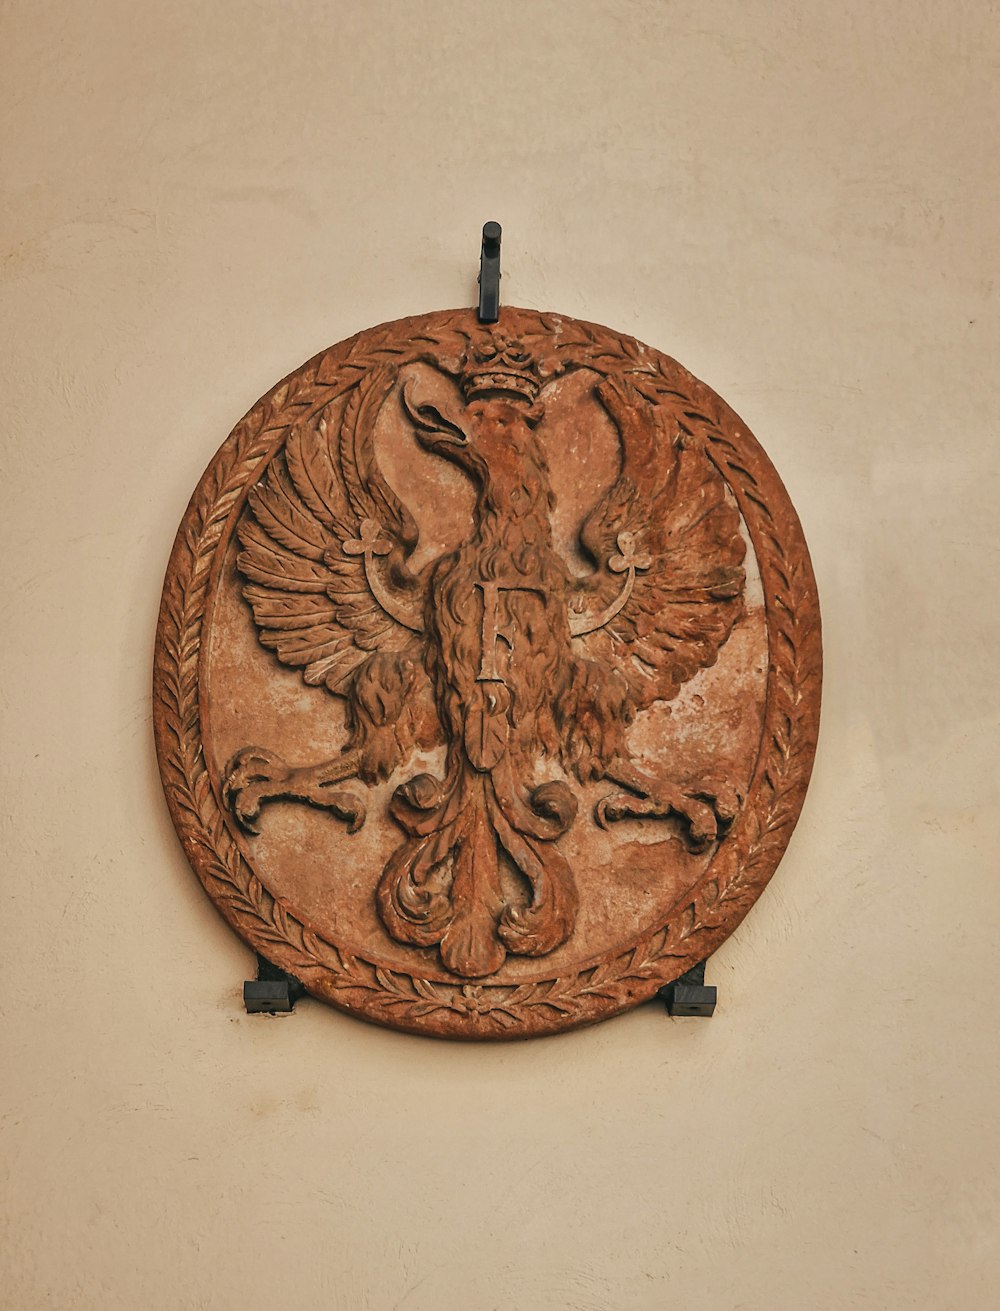 a wooden plaque with a bird on it